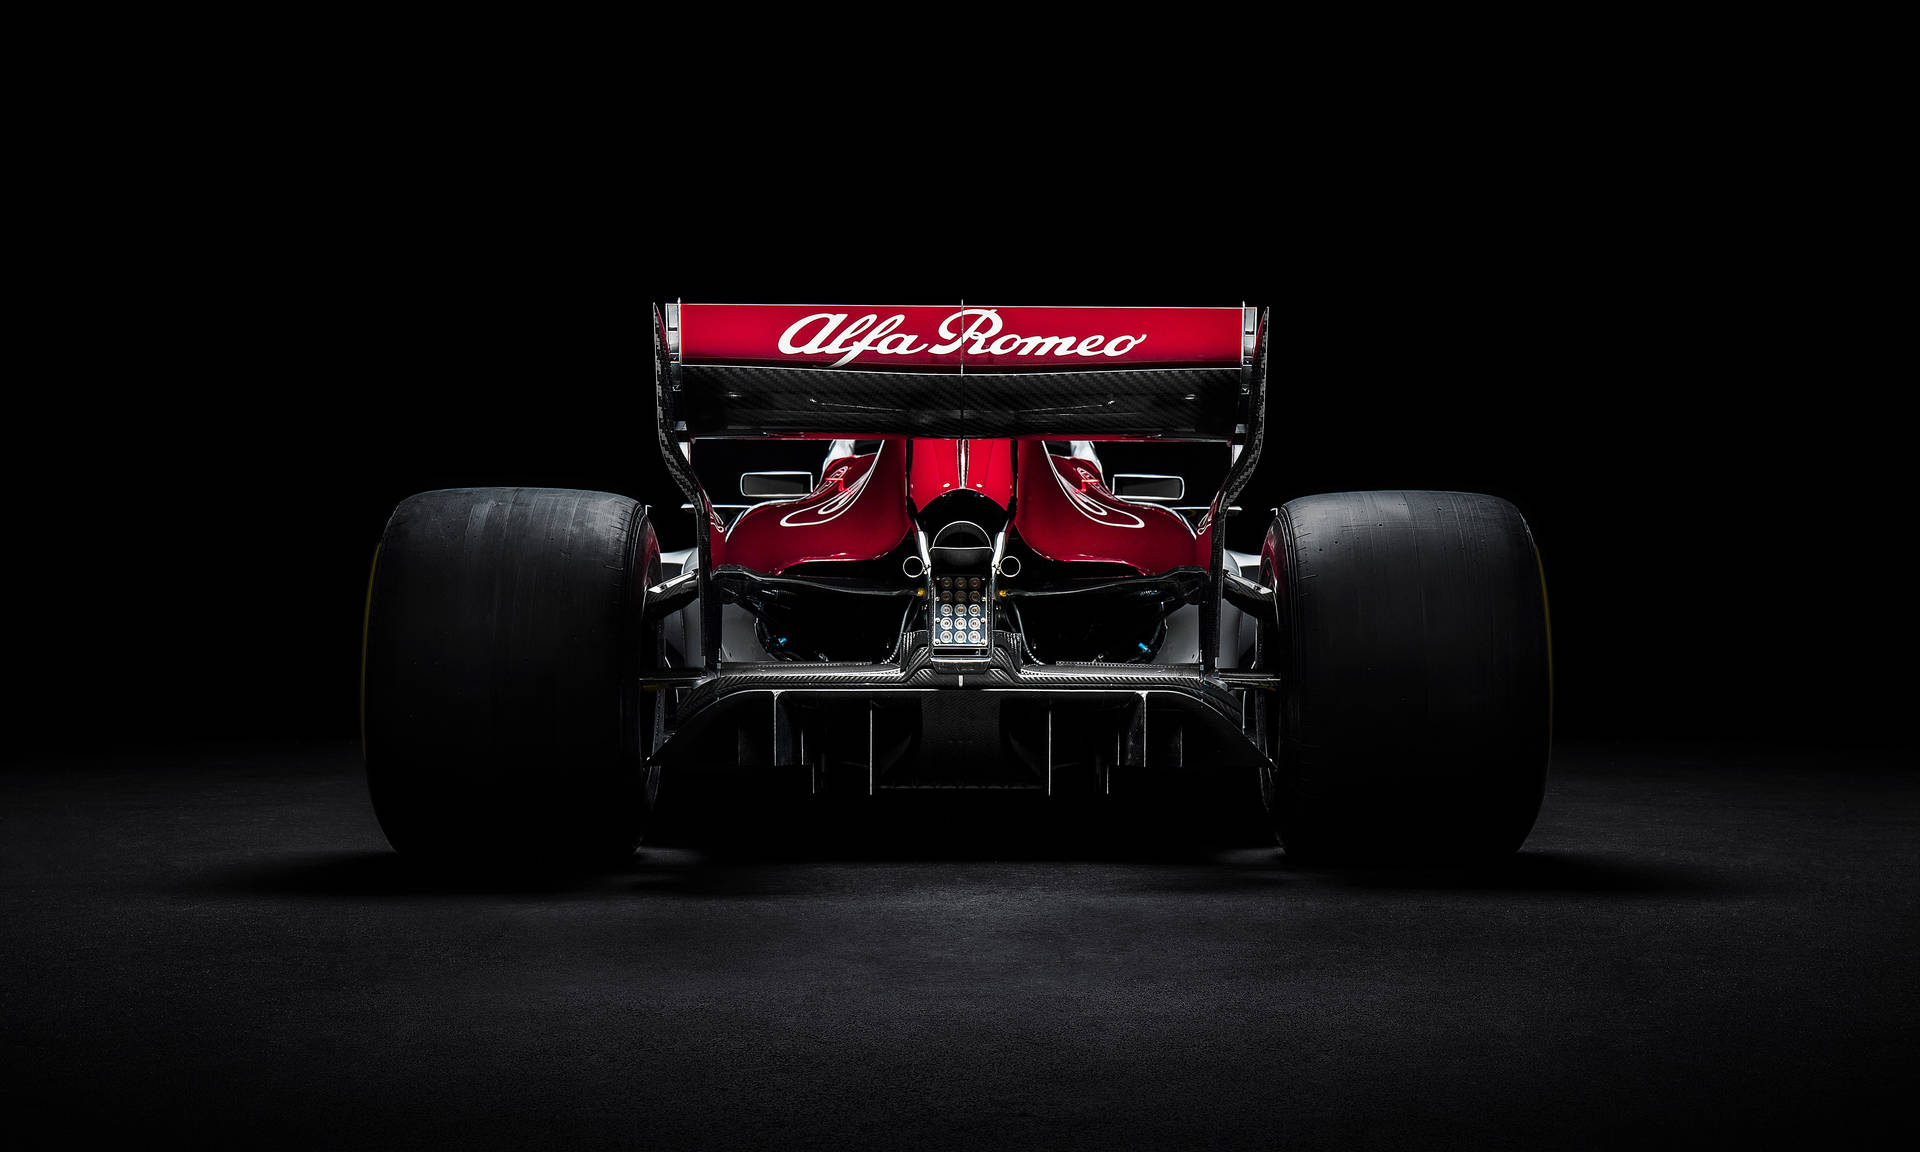 Free F1 Wallpaper Downloads, [400+] F1 Wallpapers for FREE 